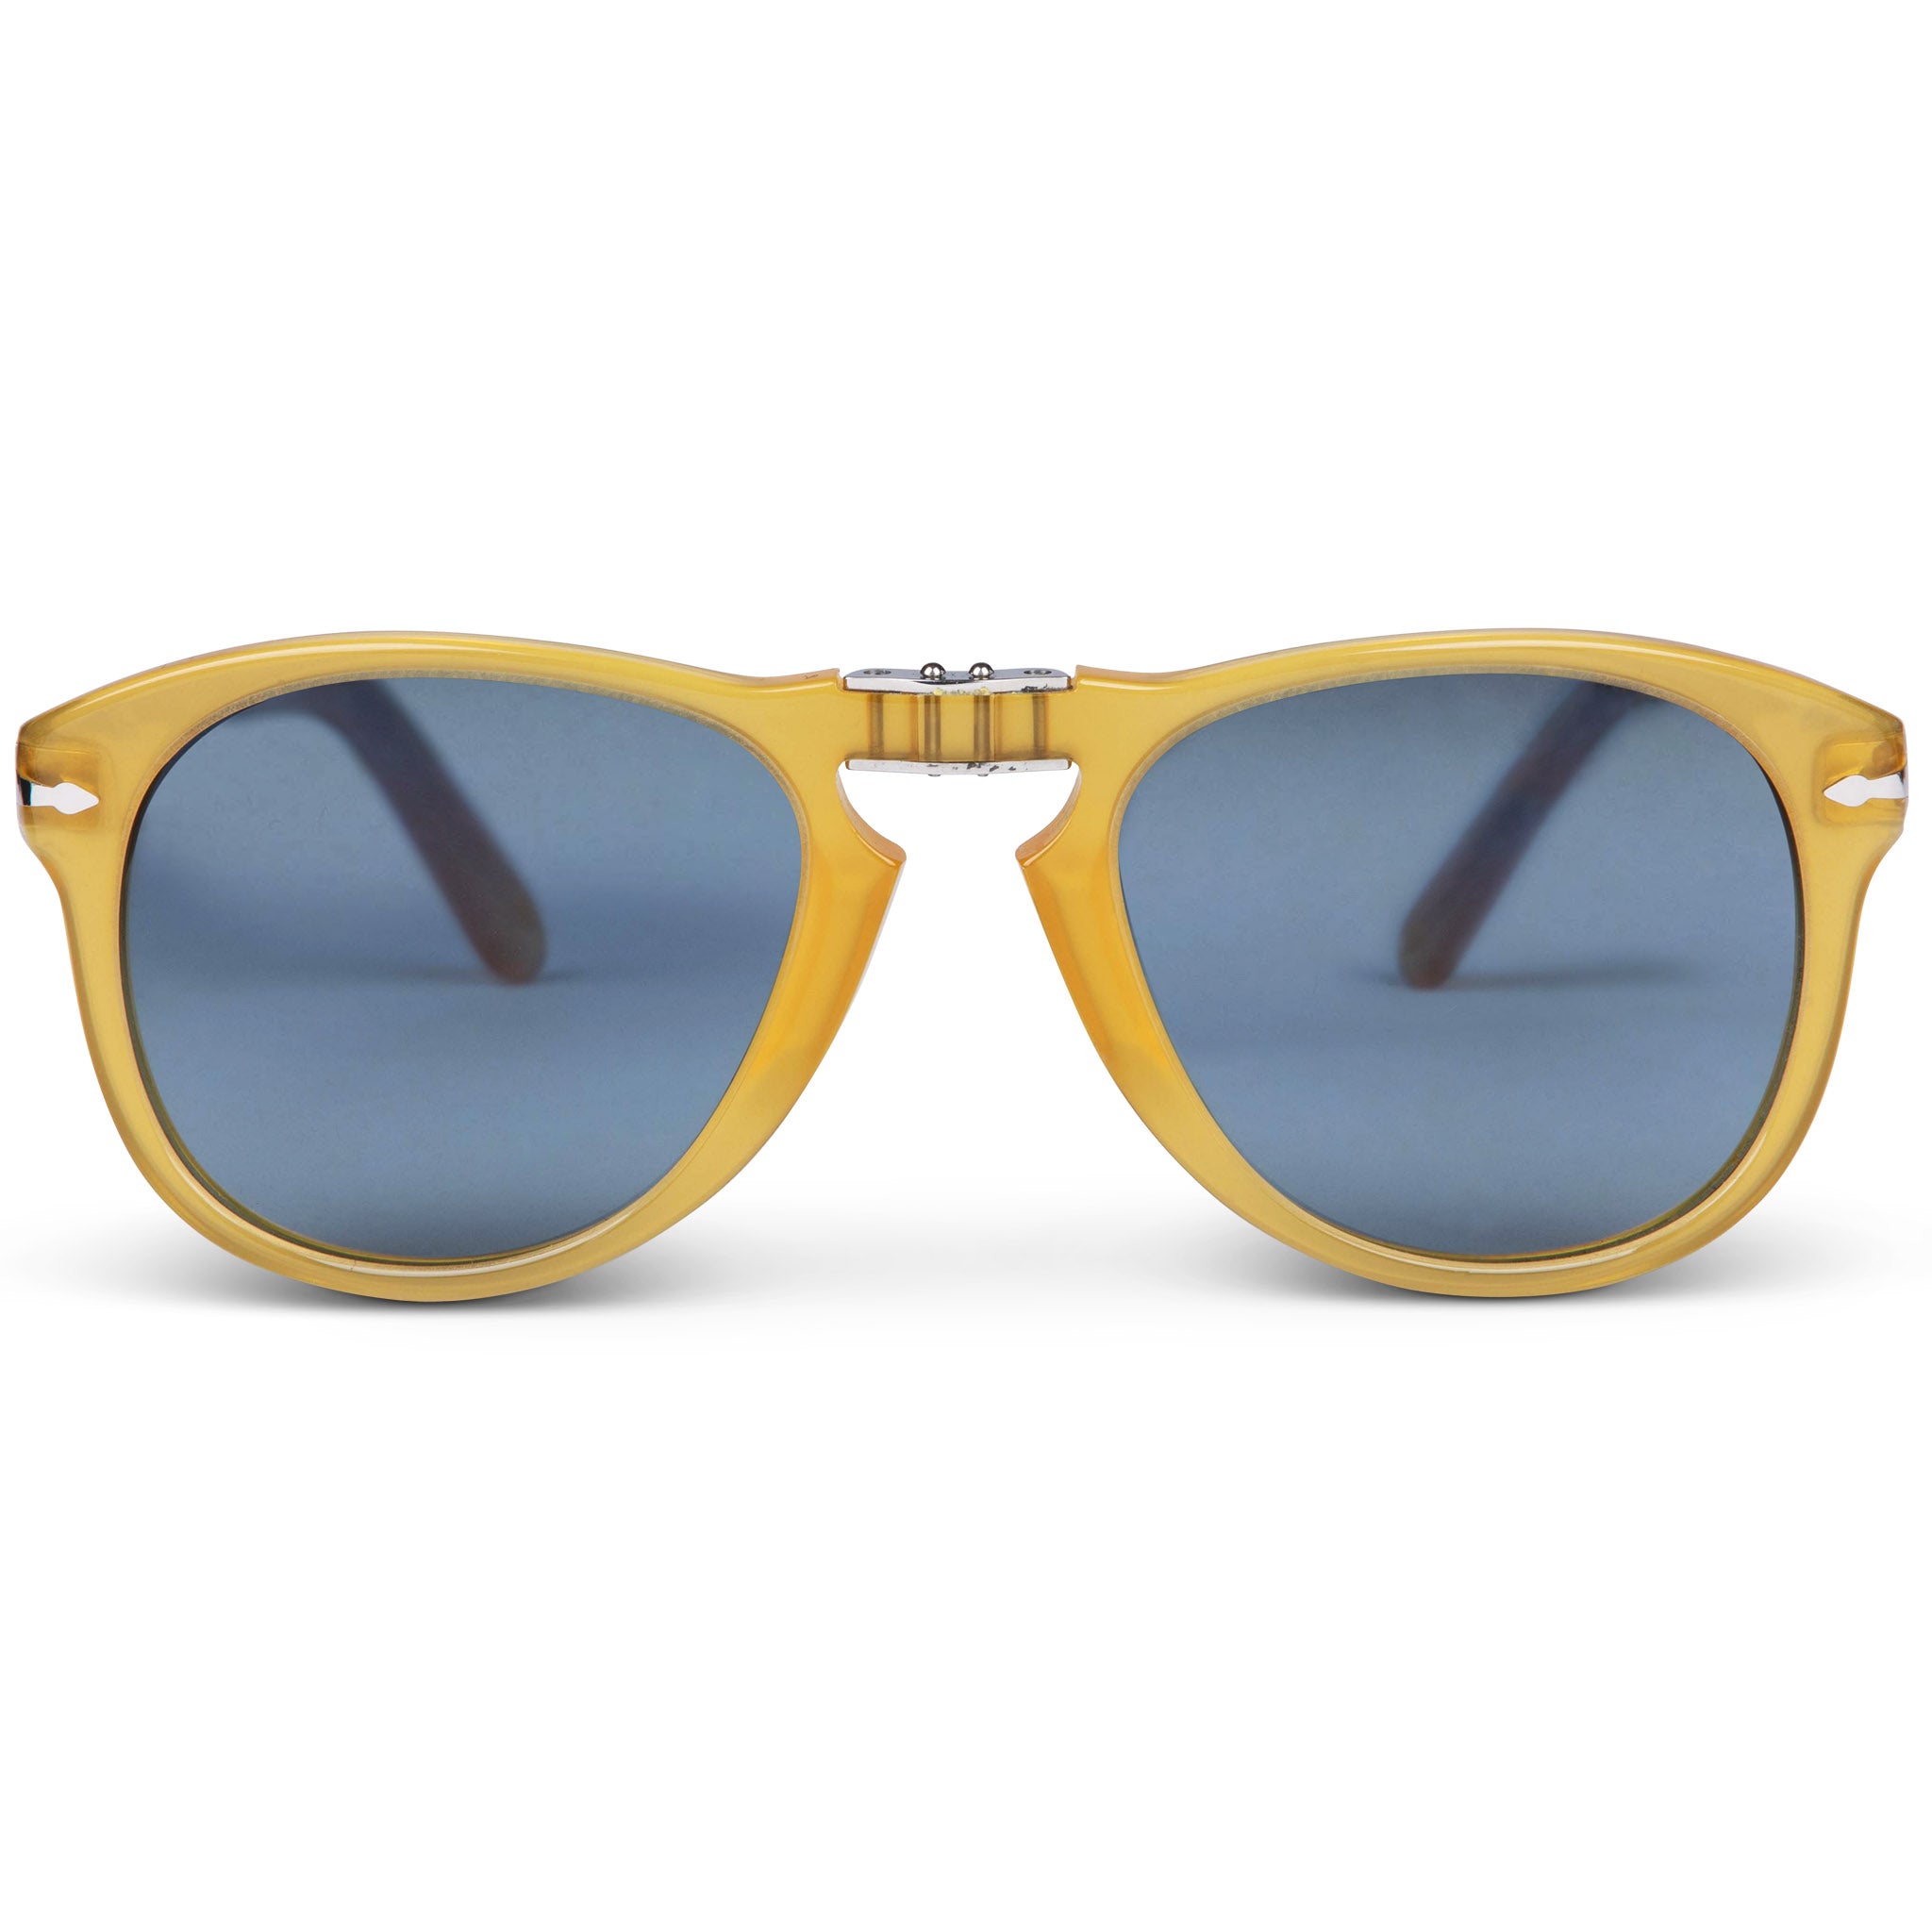 Persol 714 Steve McQueen Opal Yellow with Polarized Light Blue Gradient